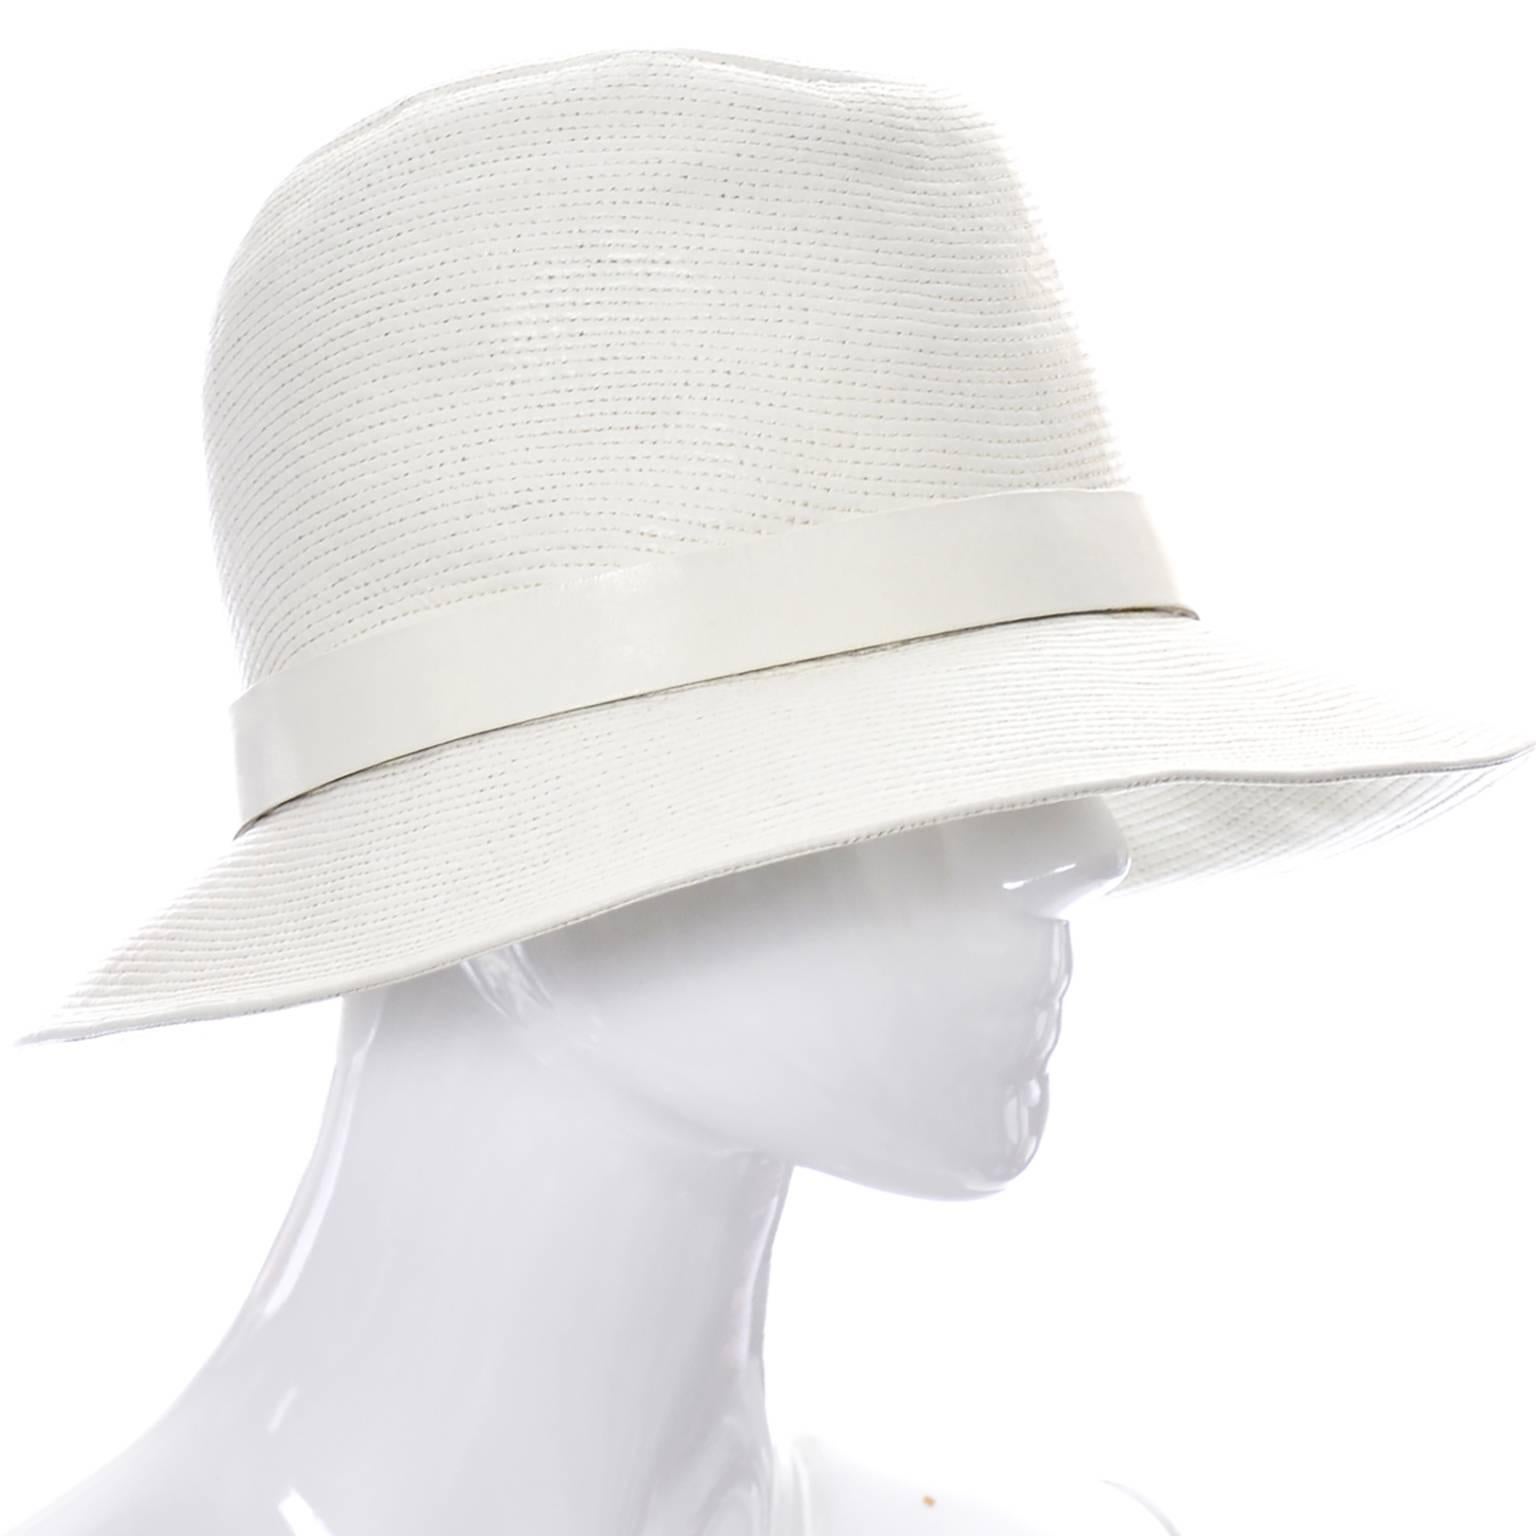 This topstitched ivory leather vintage hat was made in France exclusively for Lord & Taylor Salon in the 1970's.  This comes from an estate of the most impressive collection of vintage designer clothing I've ever handled.  Everything this woman